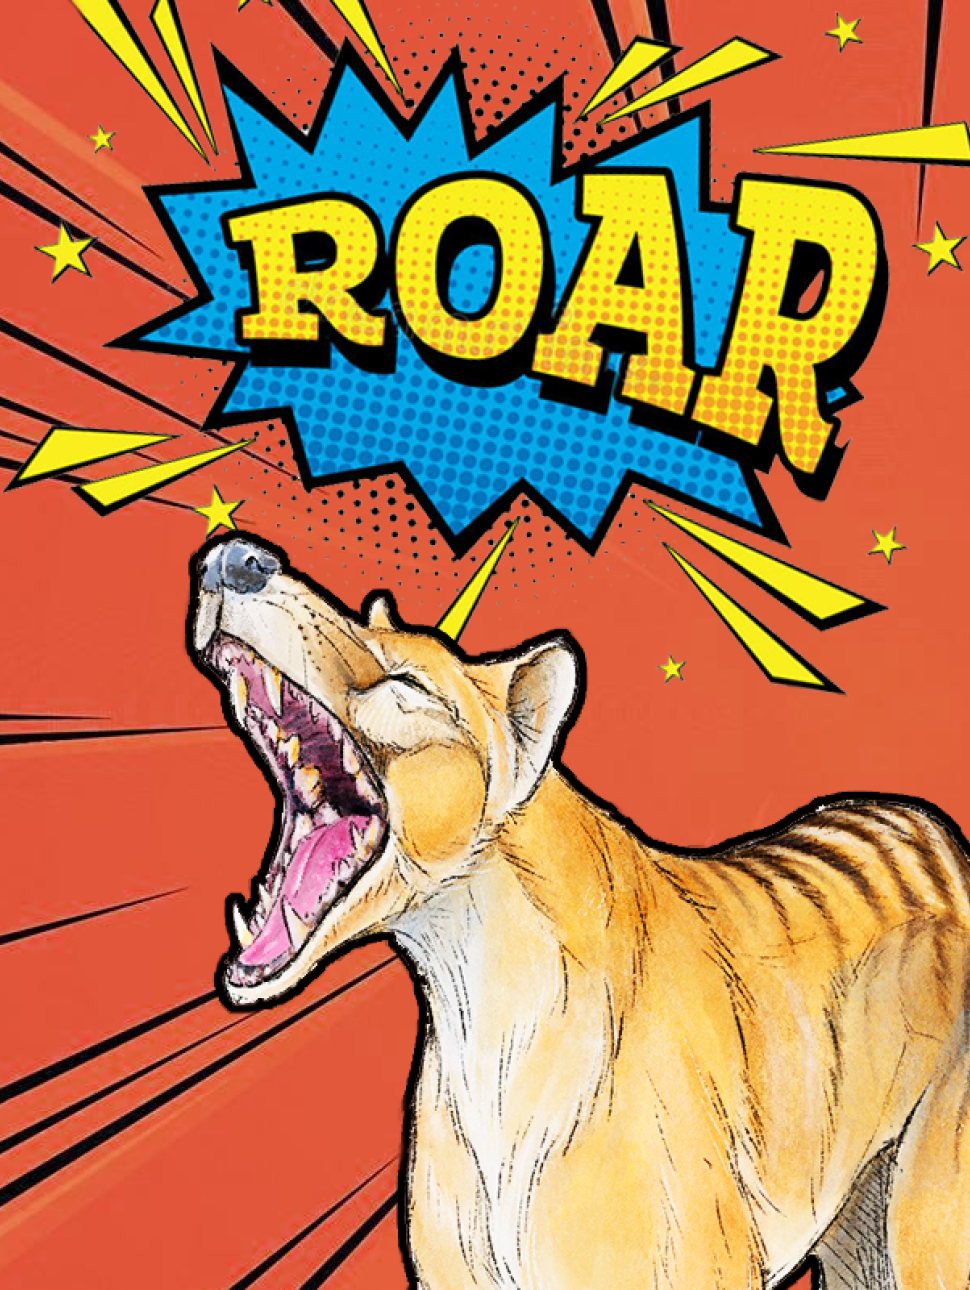 Graphic image of a dingo barking, with a roar word illustration in yellow and blue on a black and white polka-dot backdrop